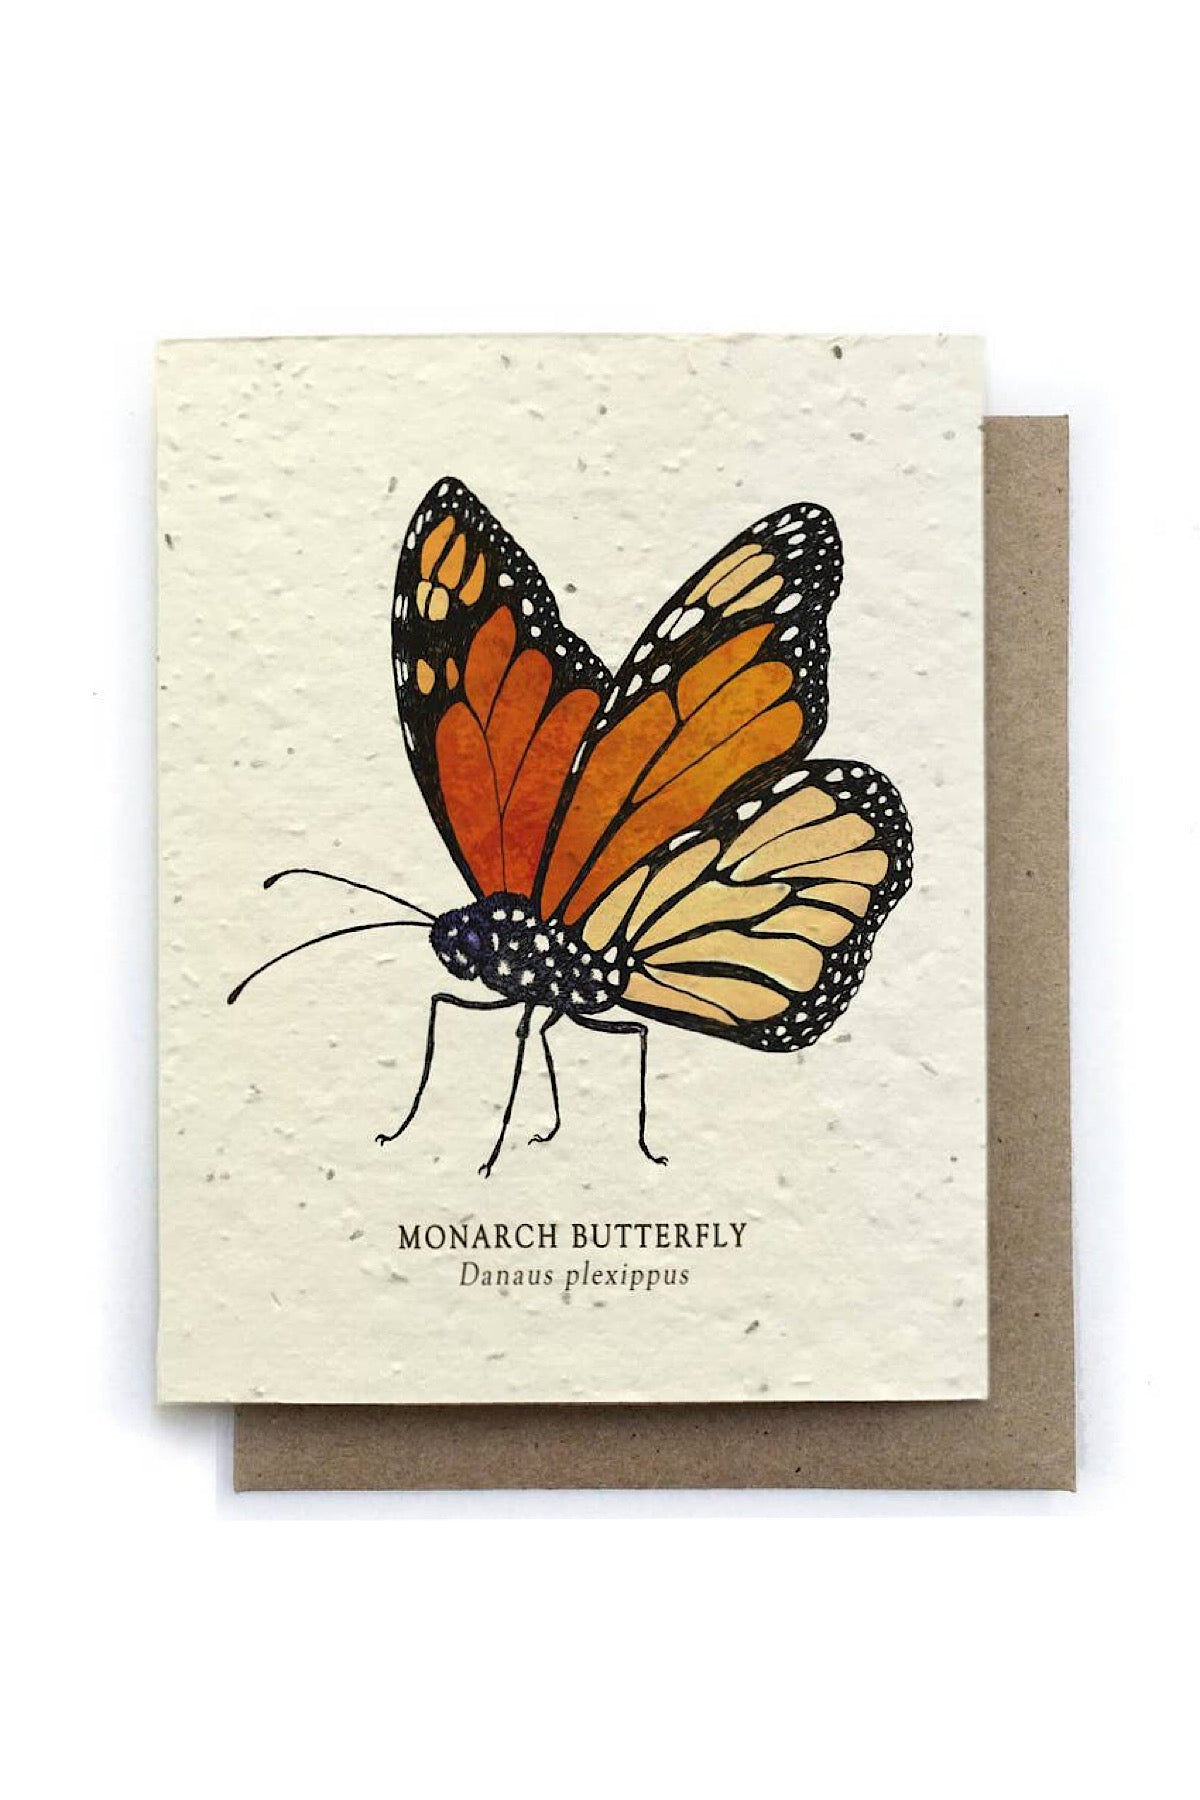 Plantable Seed Greeting Cards